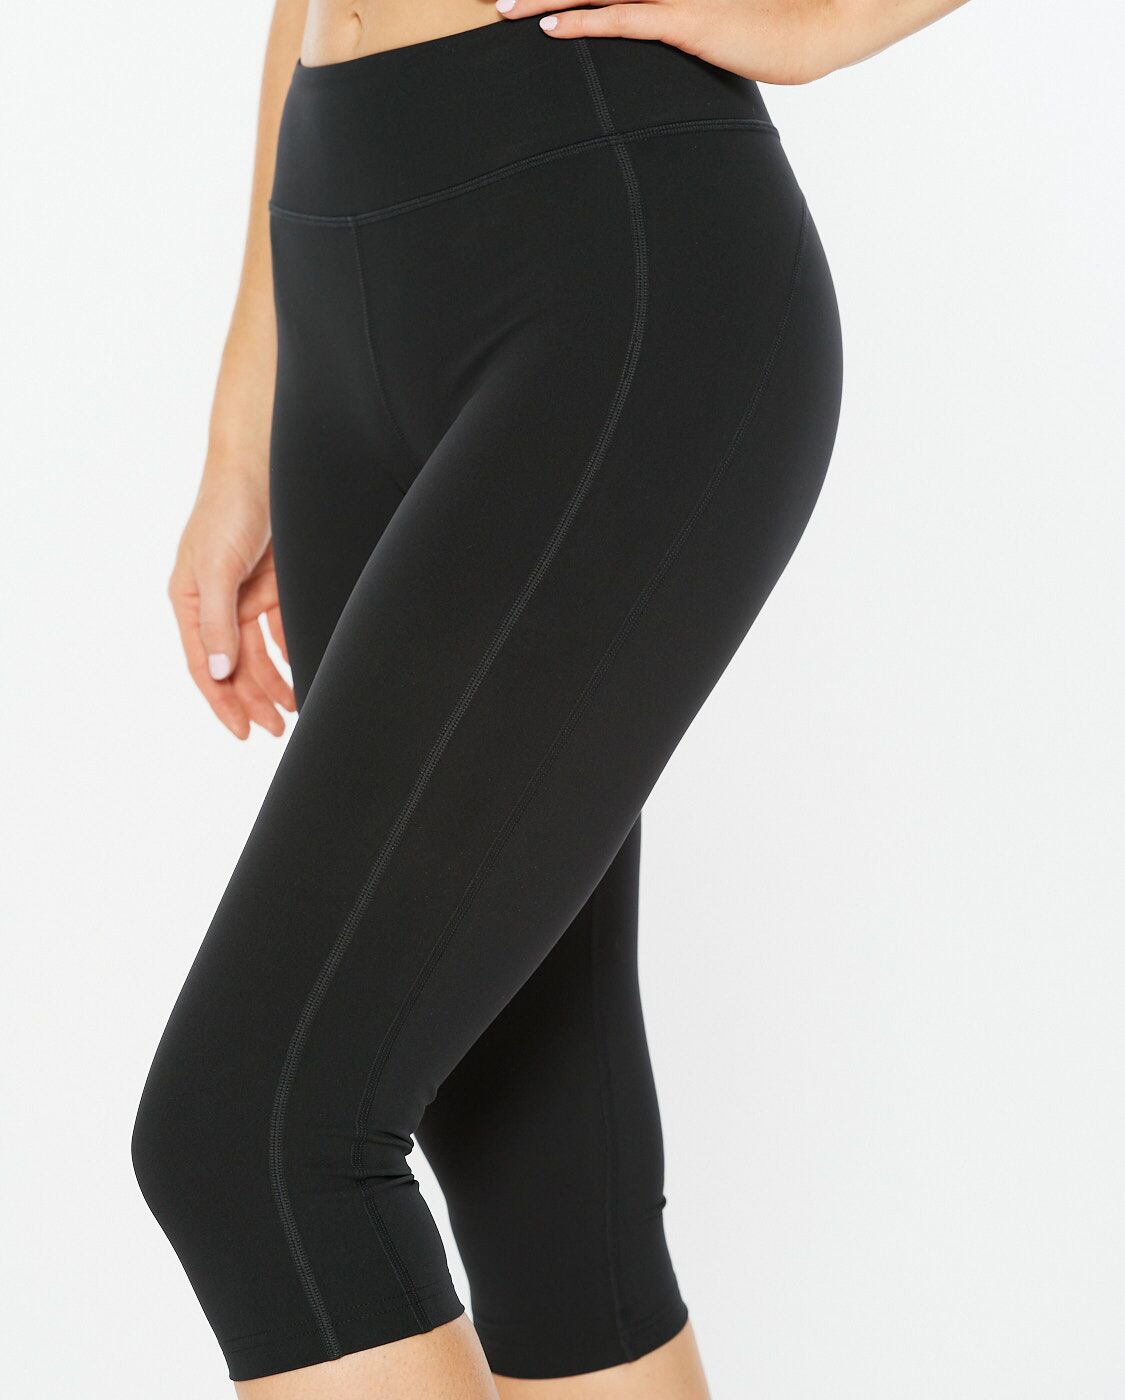 2XU South Africa - Womens Form Mid-Rise Compression 3/4 Tights - Black/Silver